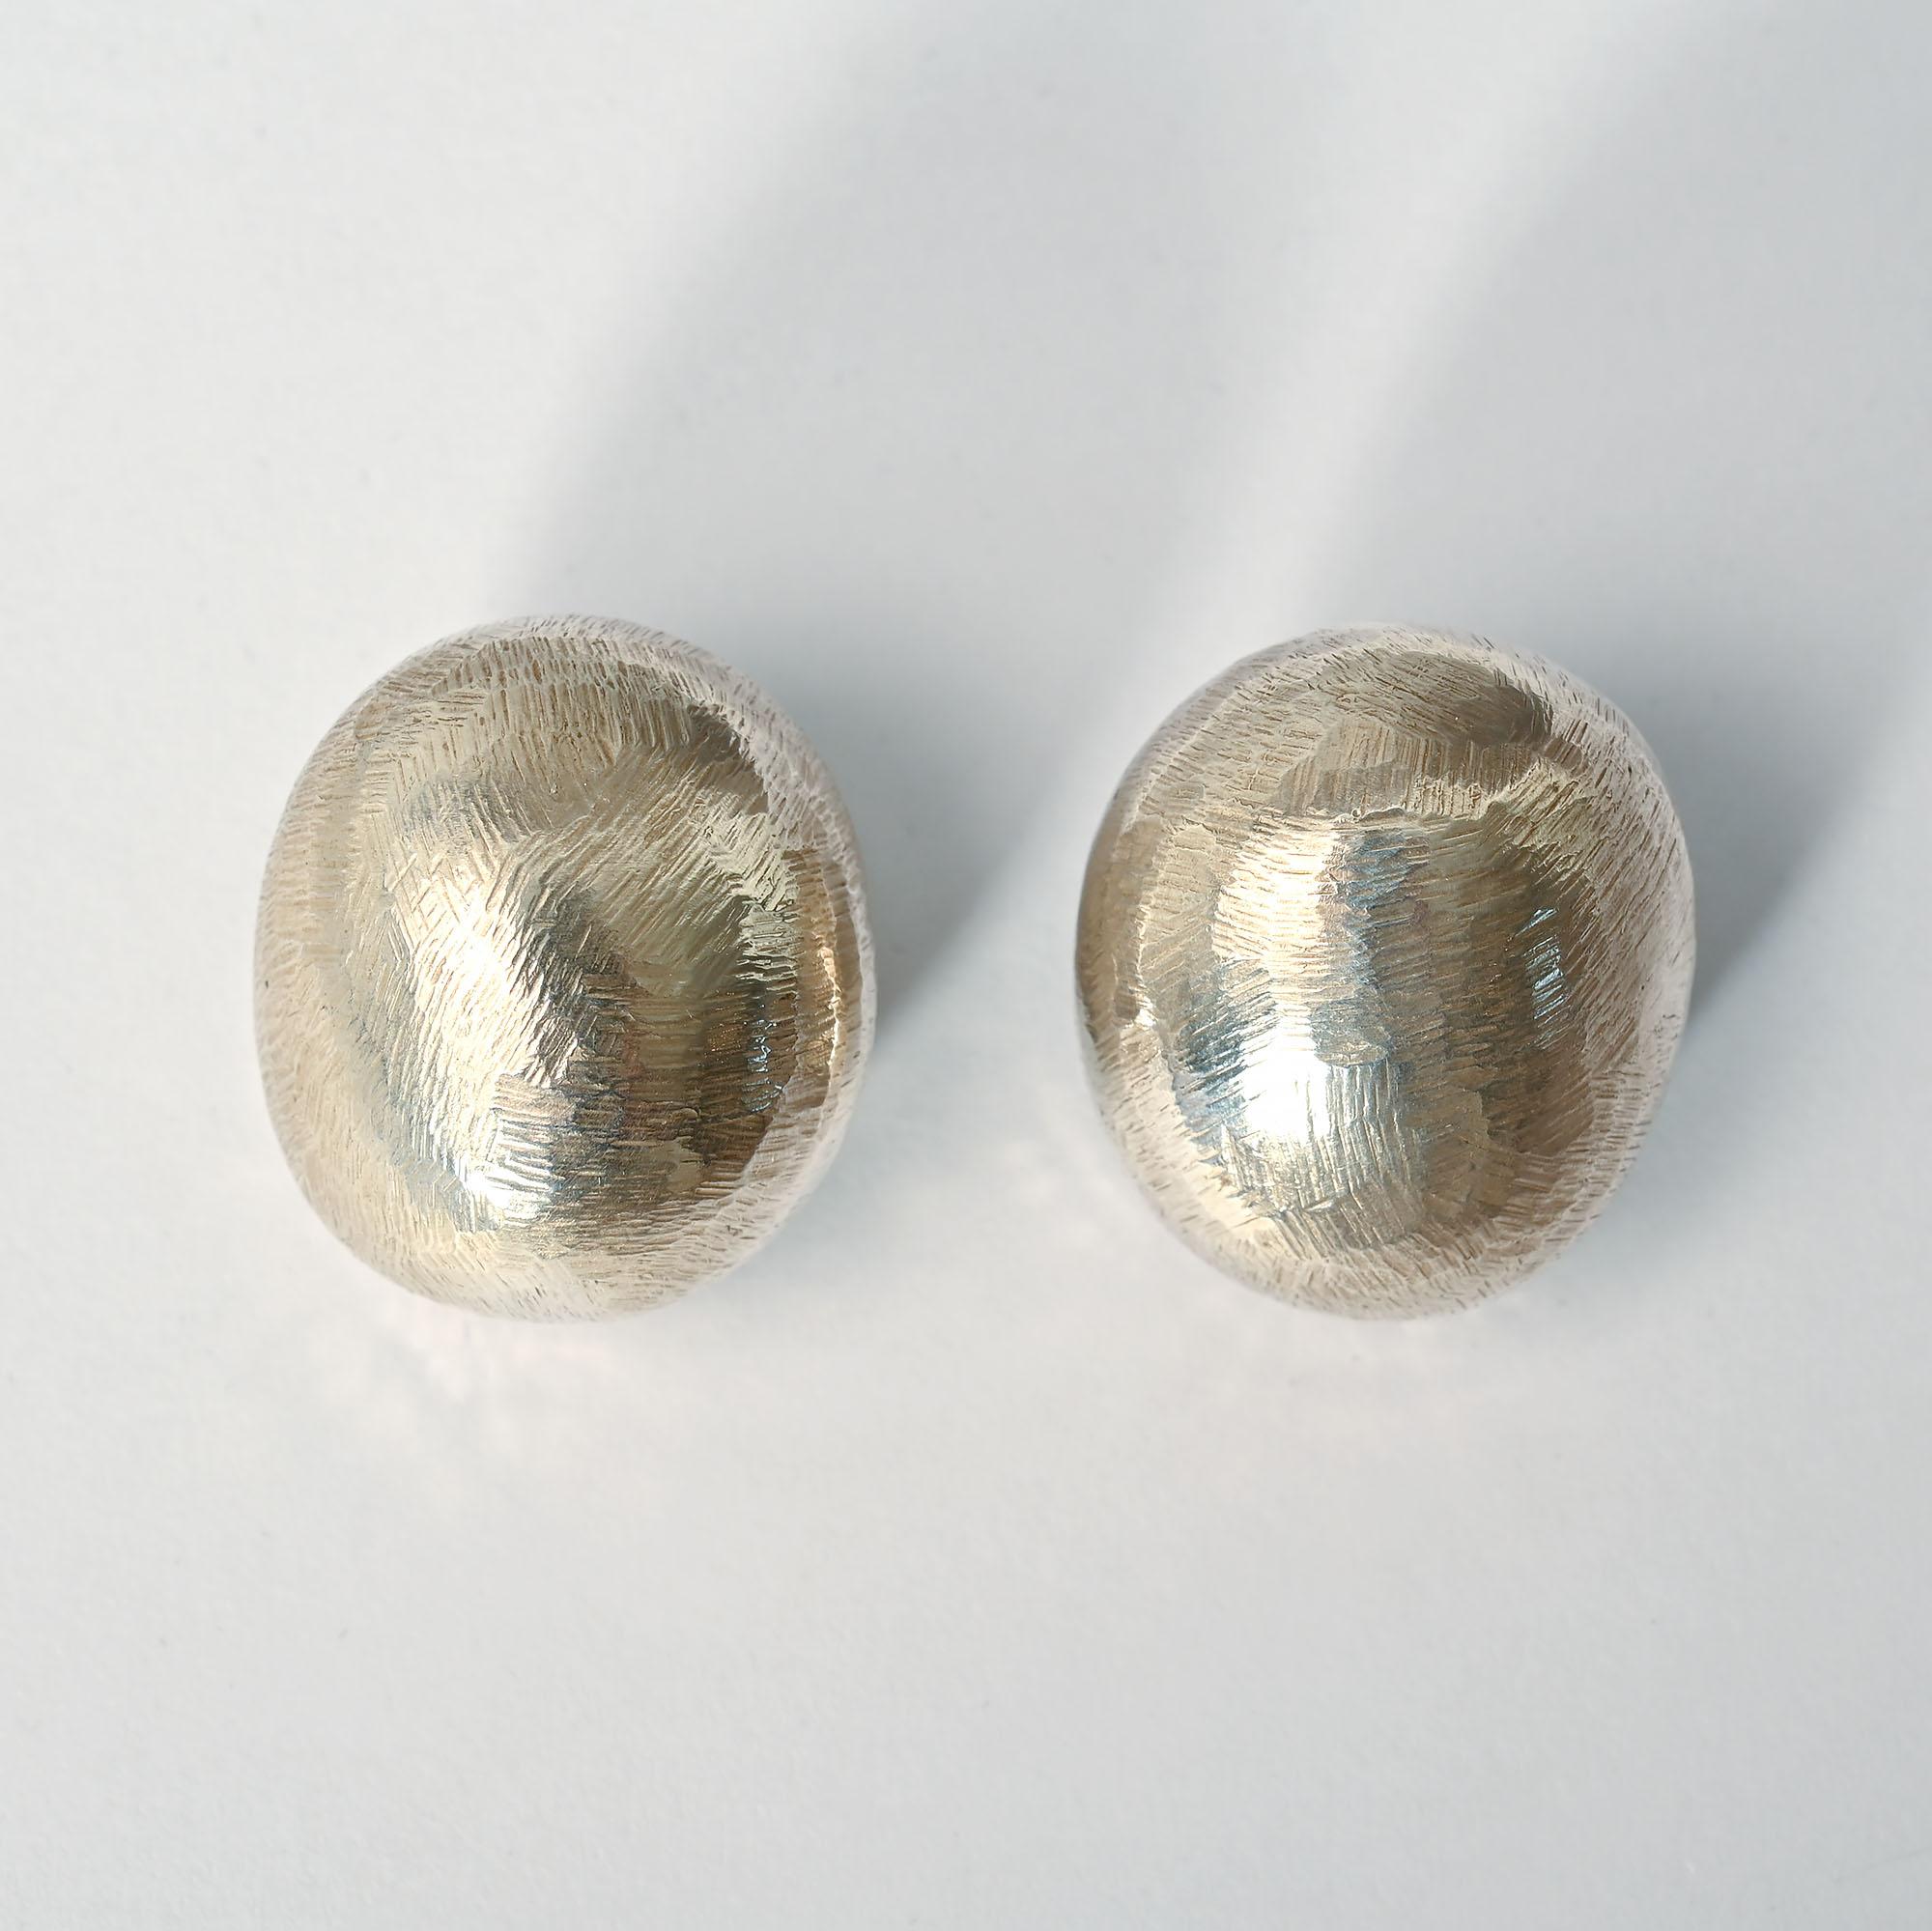 John Iversen oval sterling silver earrings from his Pebble series. They have the lightly scratched surface that he often favors. The earrings are 7/8